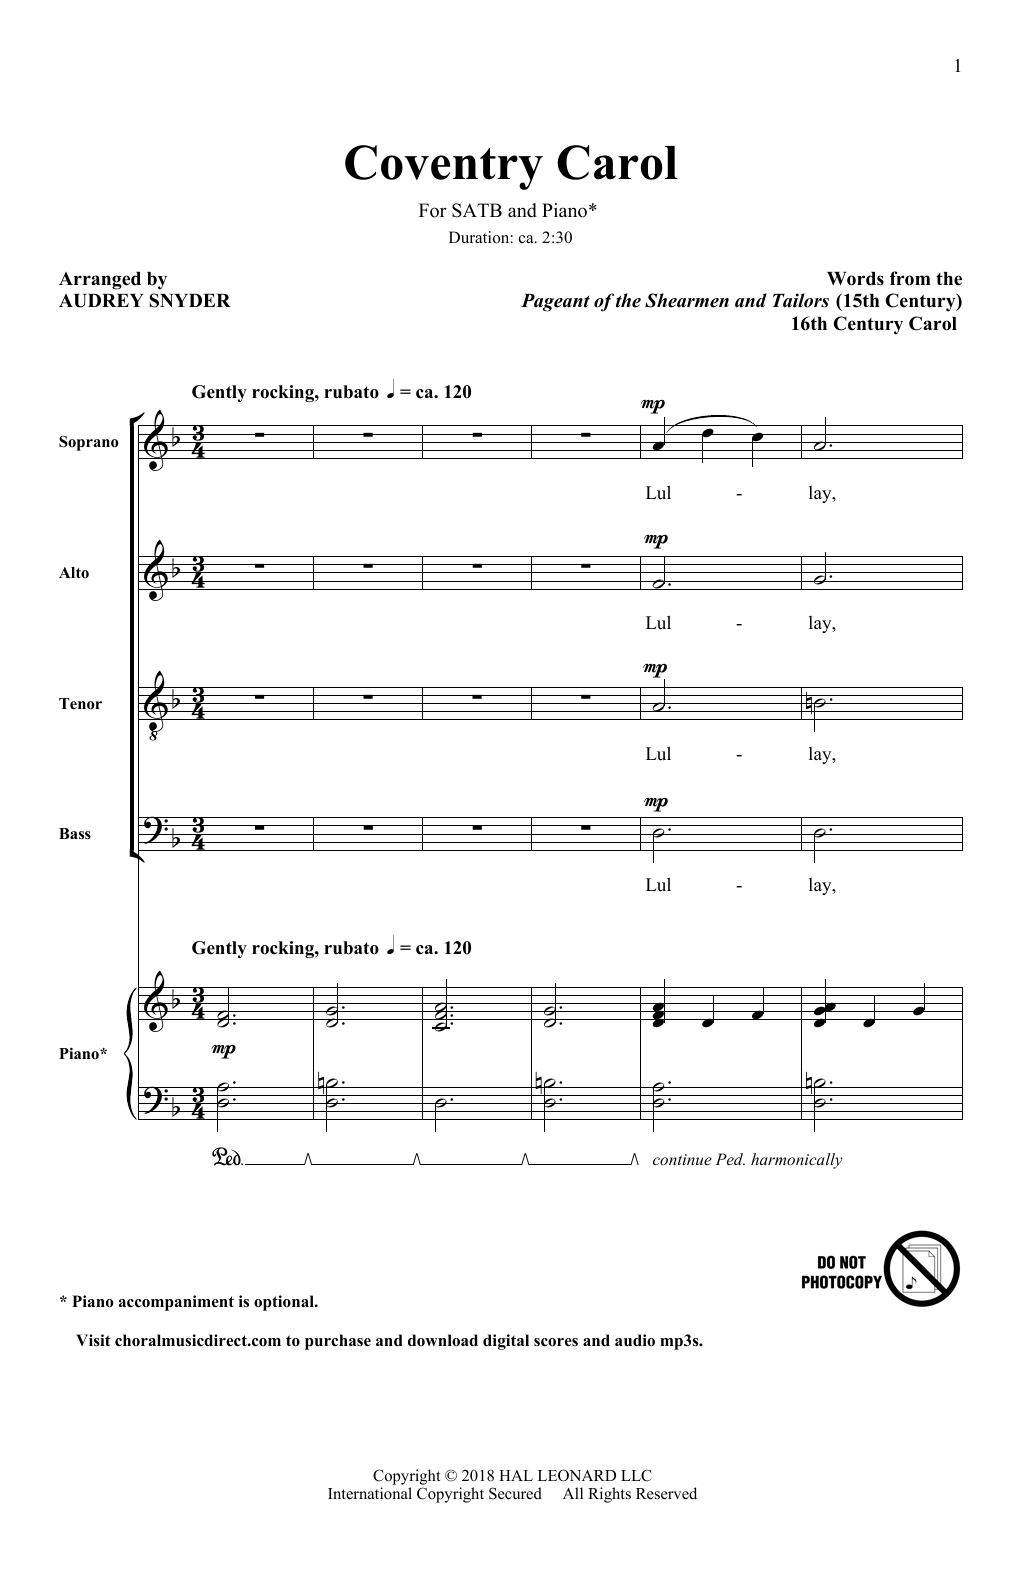 Download Audrey Snyder Coventry Carol Sheet Music